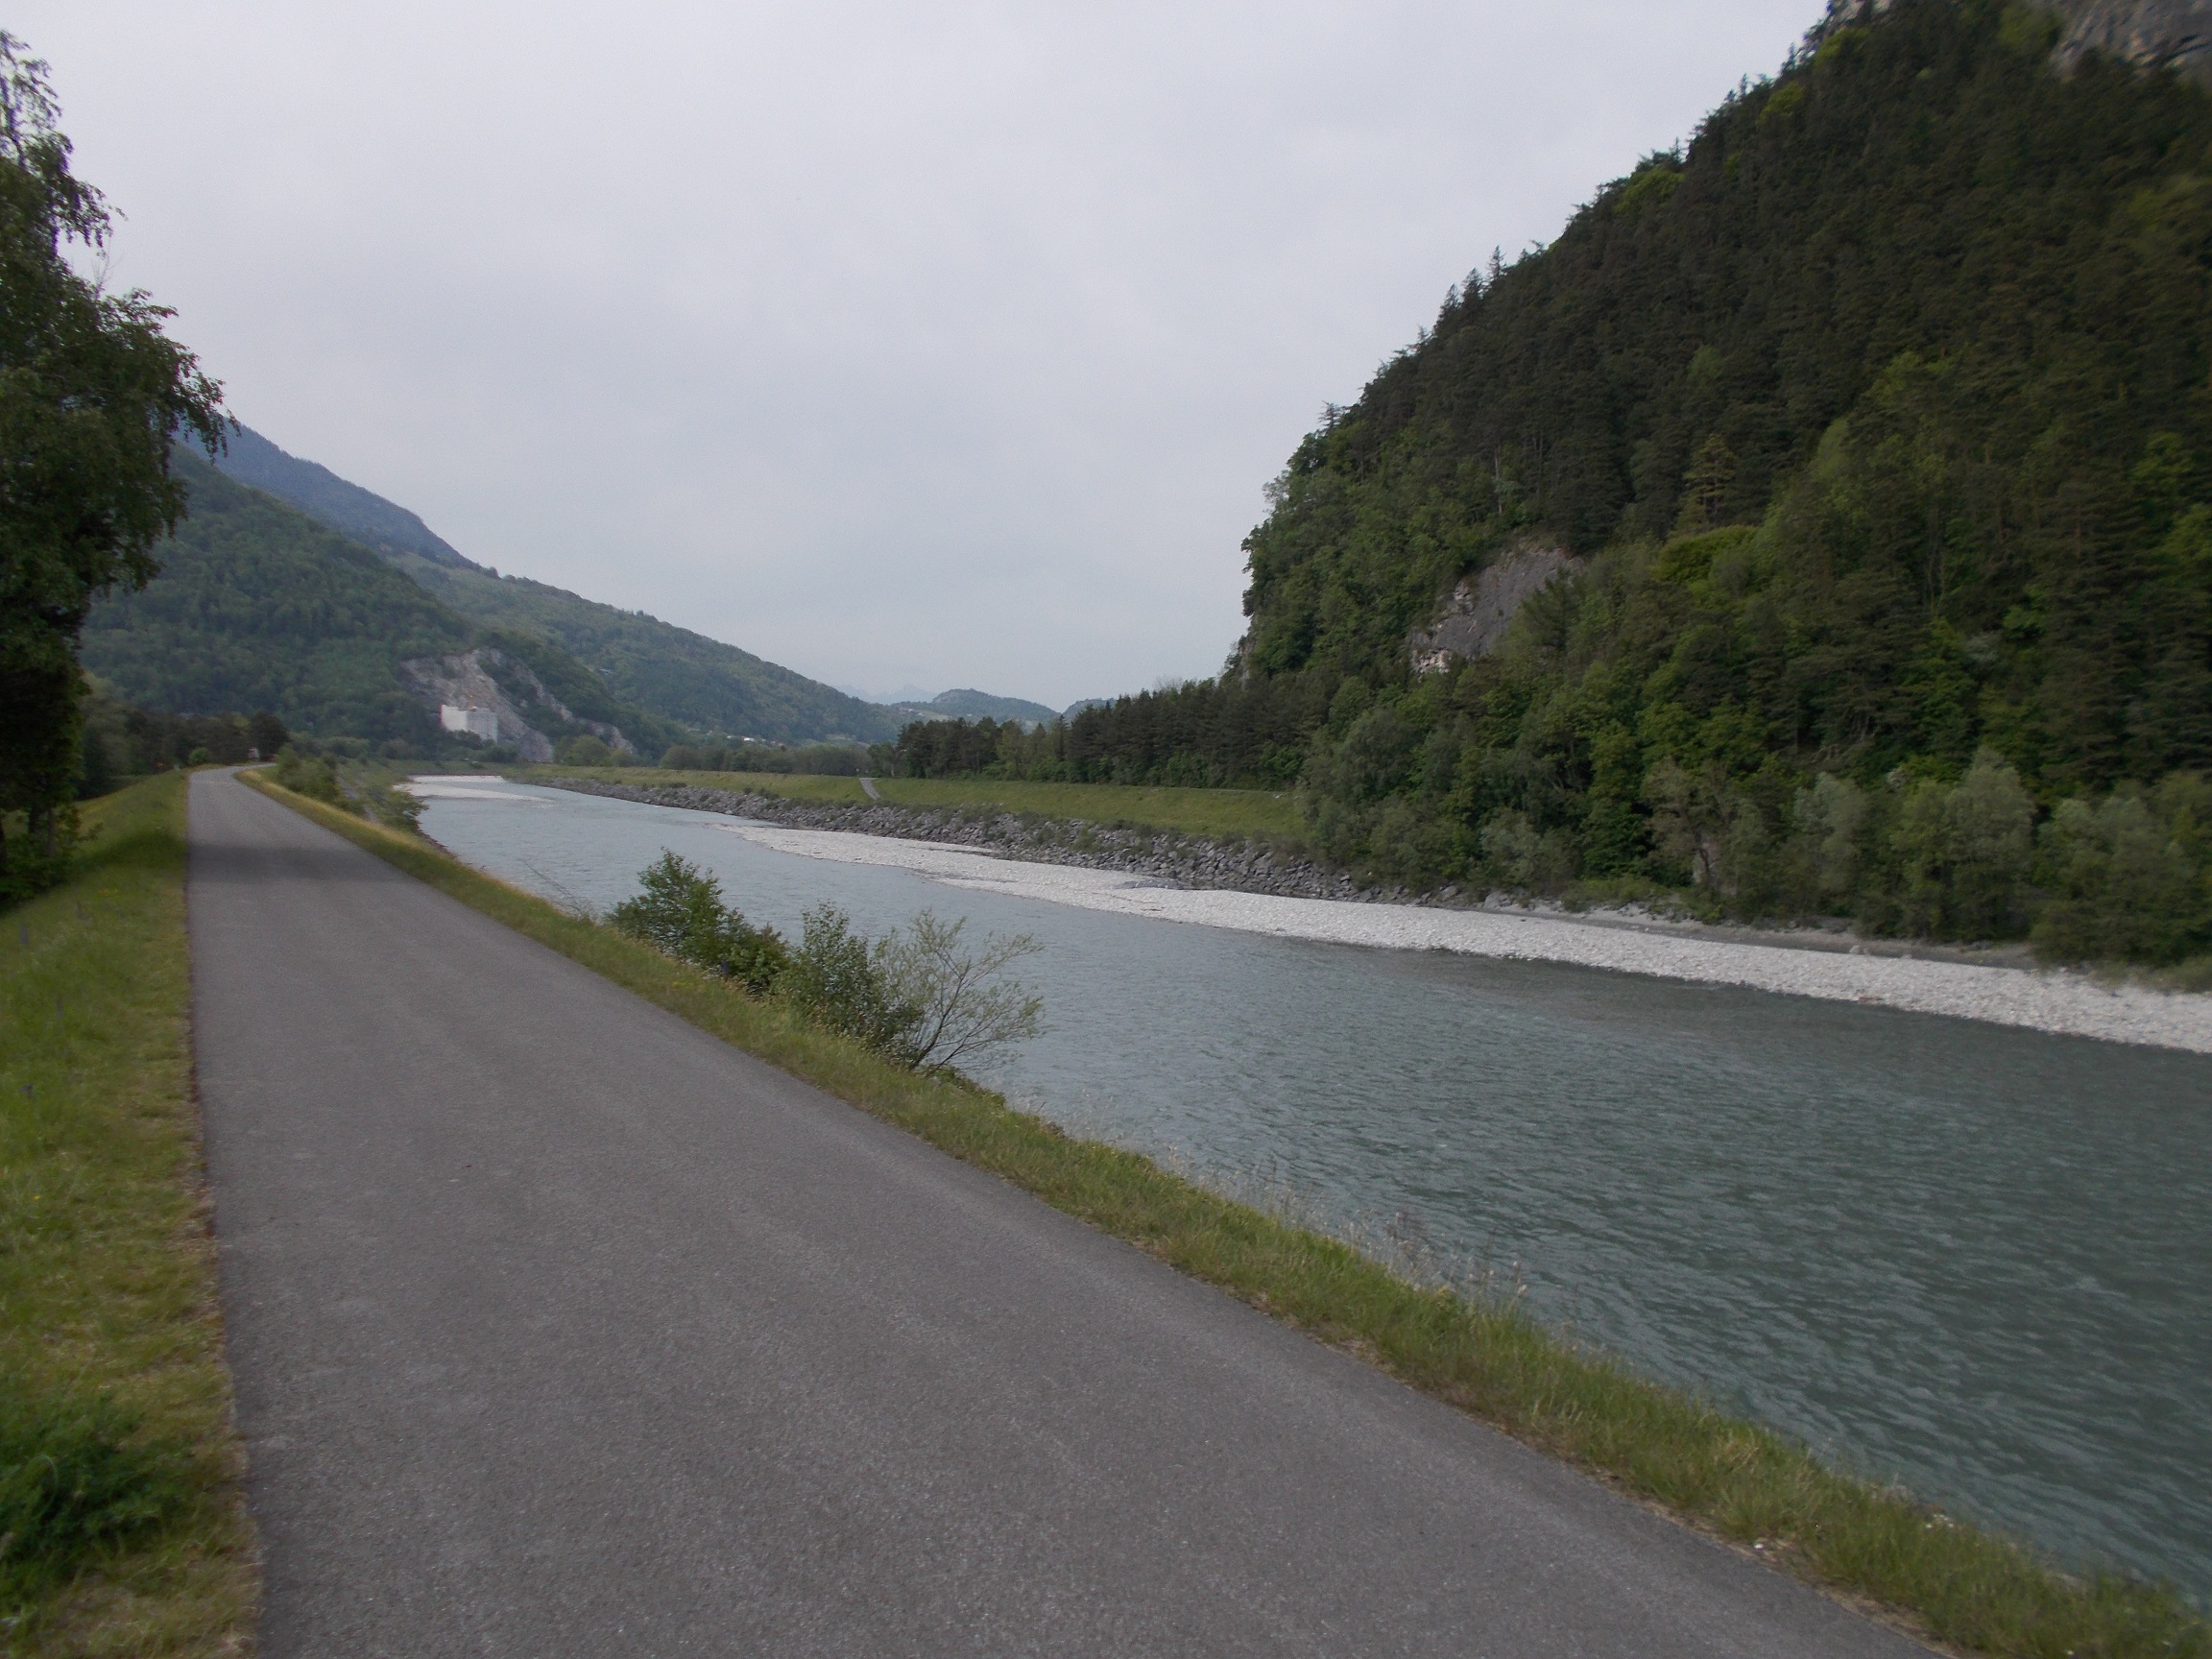 A straight section of bike path bordering the Rhine river in the river valley.